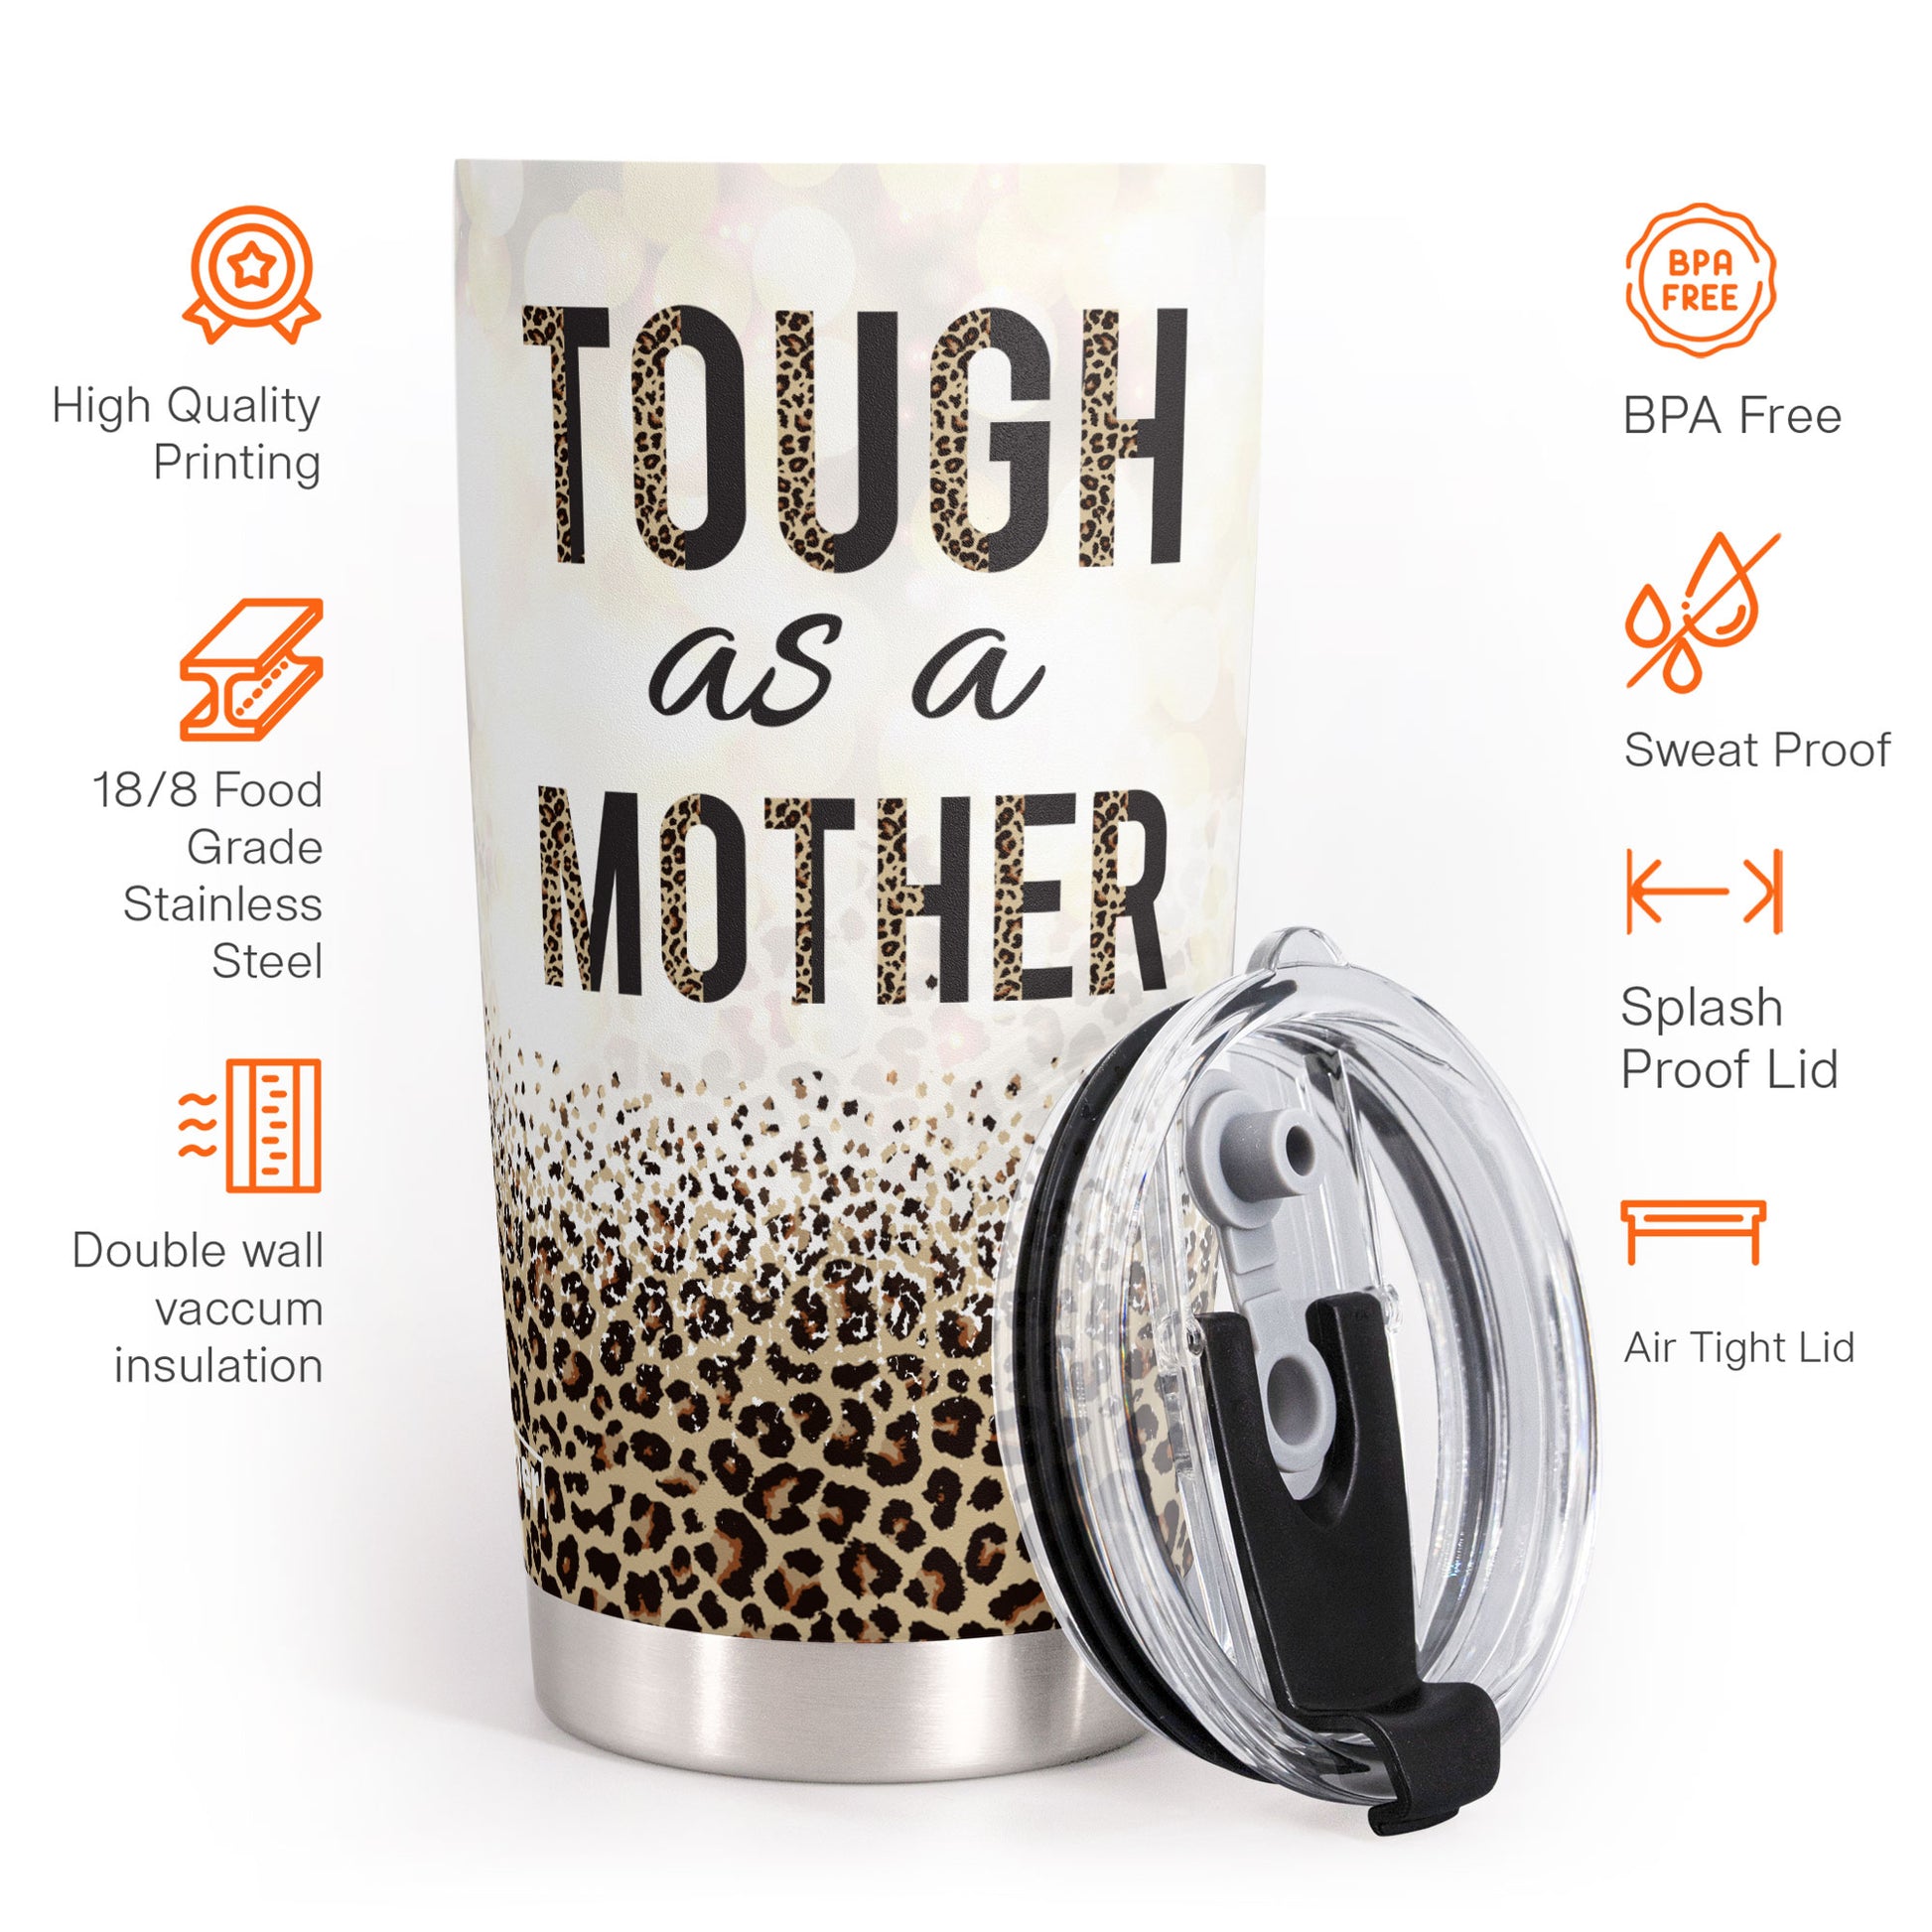 Mama Bear Personalized Tumbler With Kids Name, Christmas Gift For Mom,  Tough As A Mother Tumbler - Best Personalized Gifts For Everyone